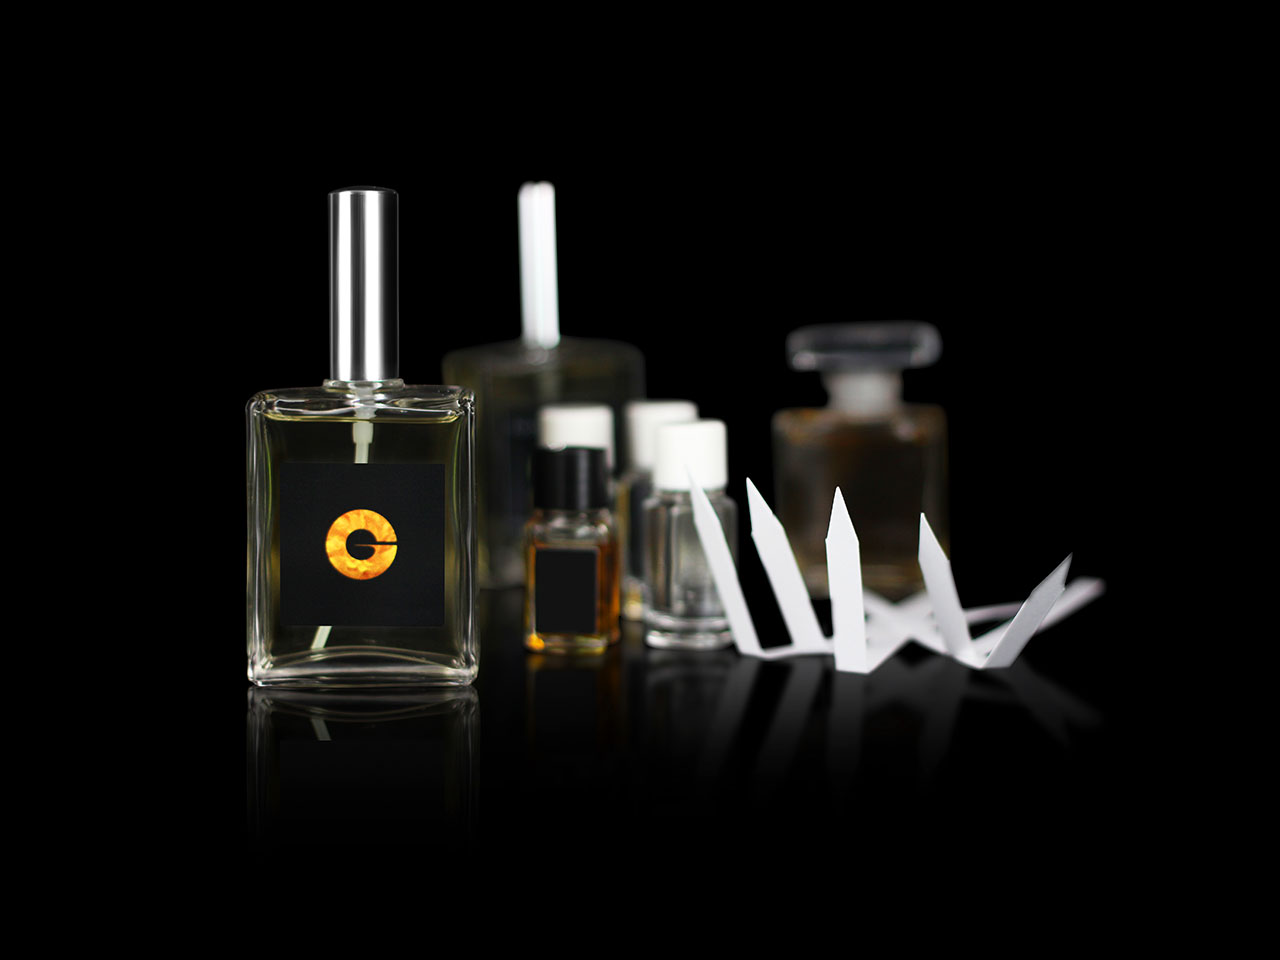 Perfume bottles and smelling strips